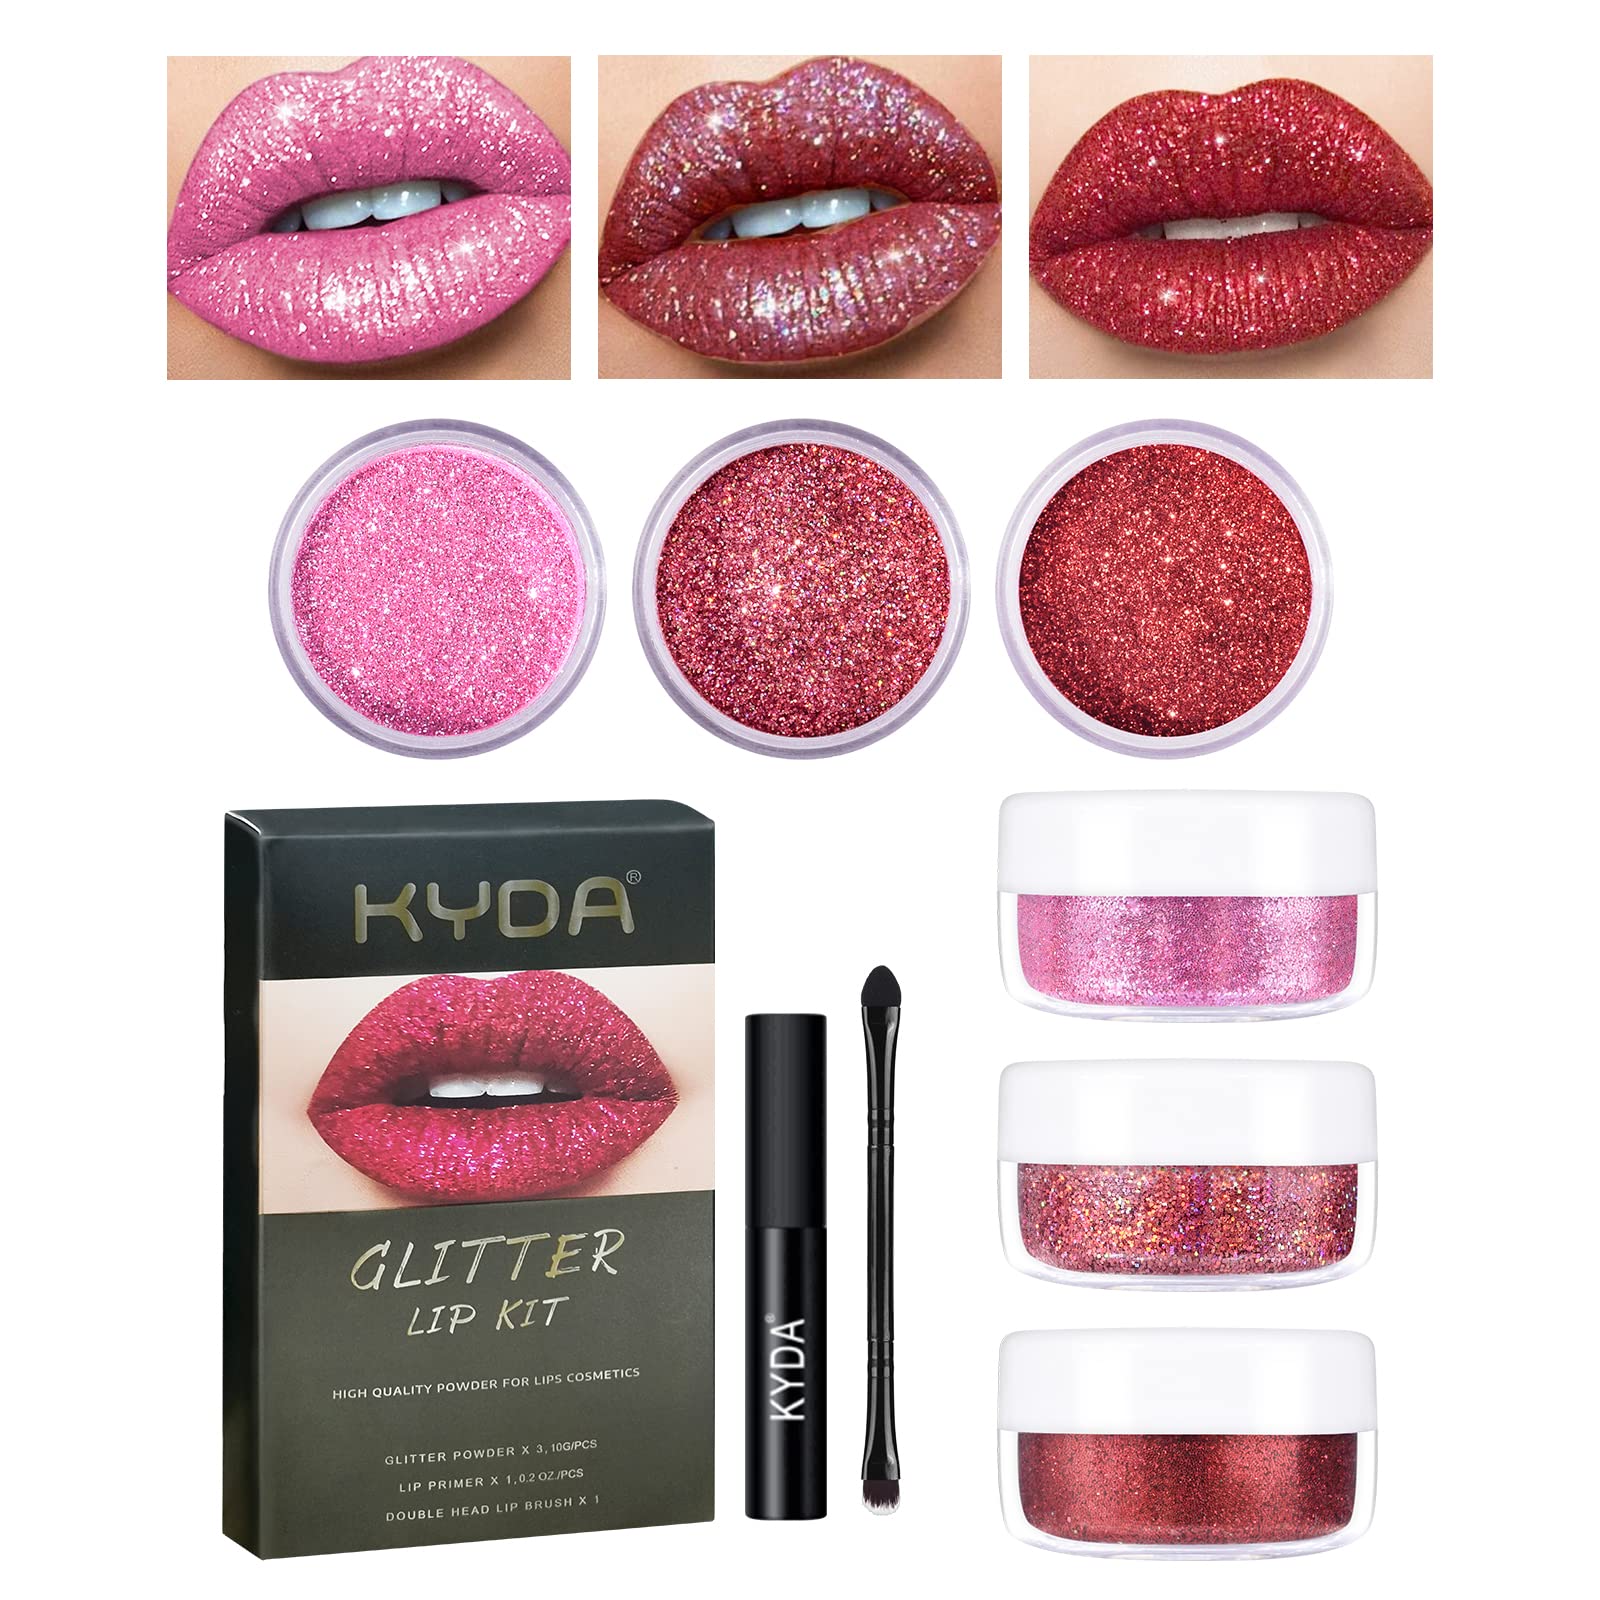 FREEORR 3 Colors Glitter Lip Kit, Diamond and Glitter Metallic Lip Powder with Lip Primer, Waterproof Long Lasting & Smudge Proof, Shimmer Sparkly Glitter Lip Cosmetic without Sticky Flake Off Set A